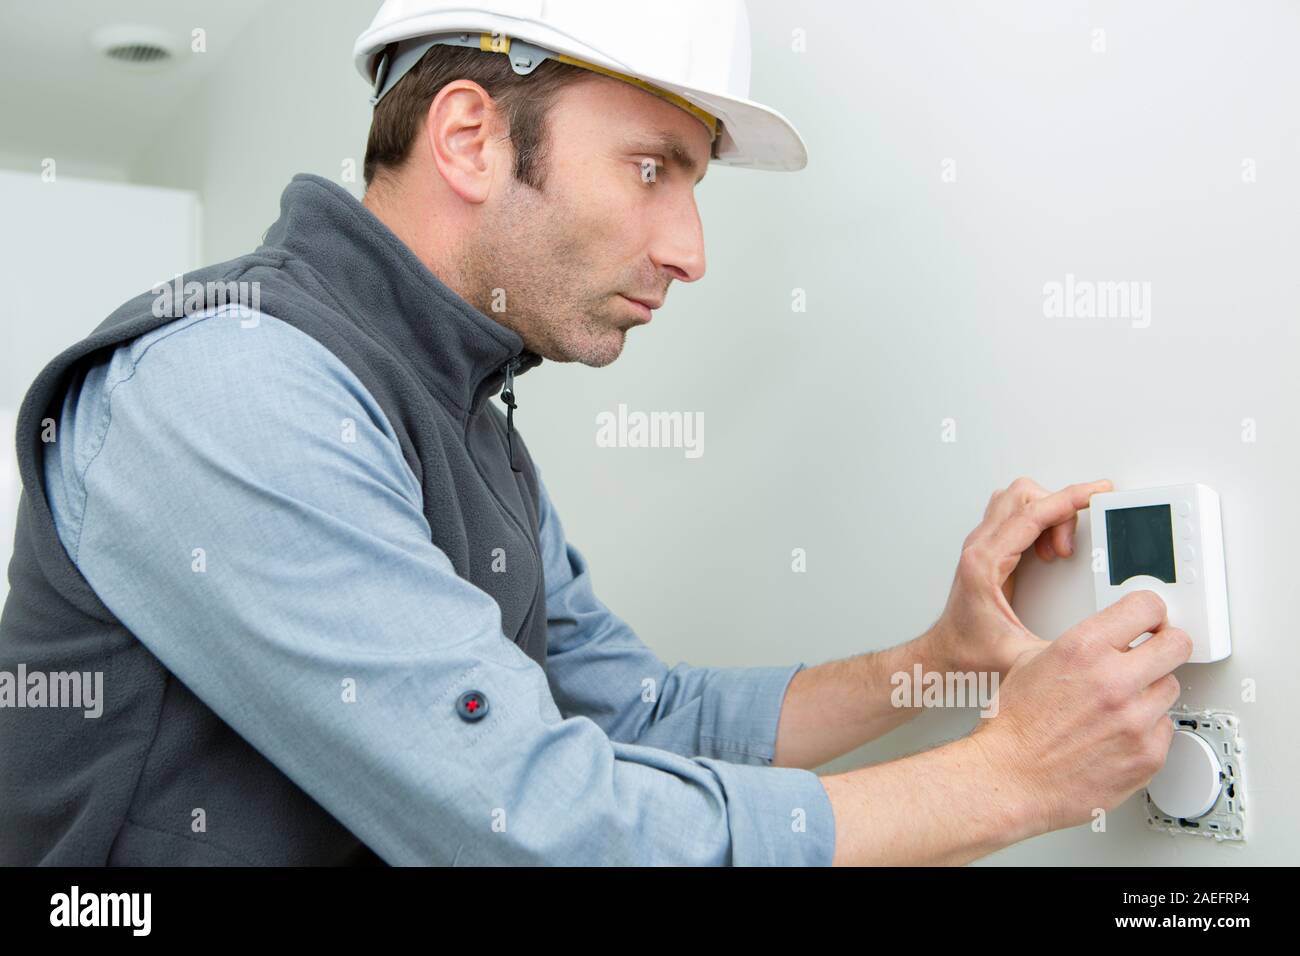 male worker installing thermostat Stock Photo